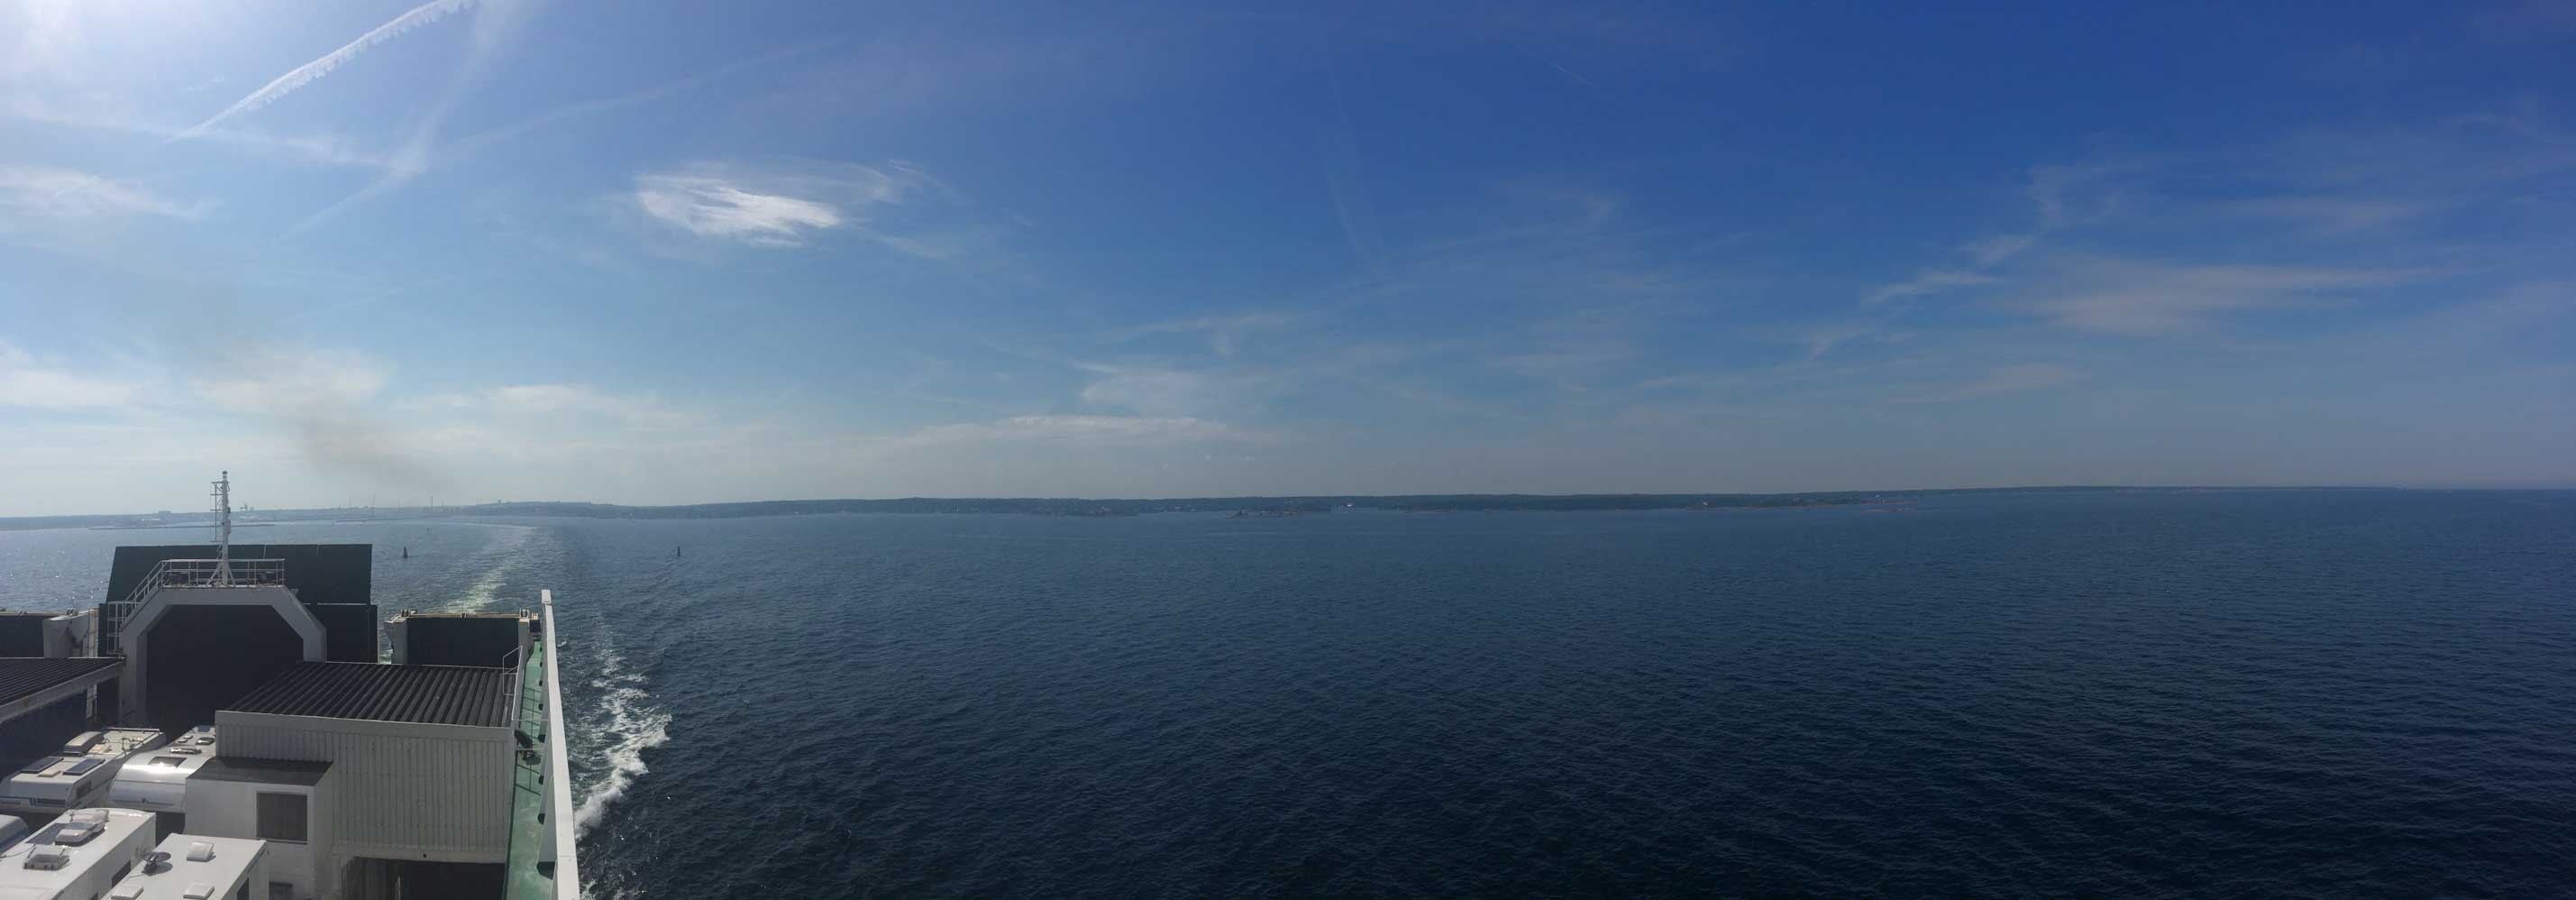 The view from the ferry - Baltic Sea